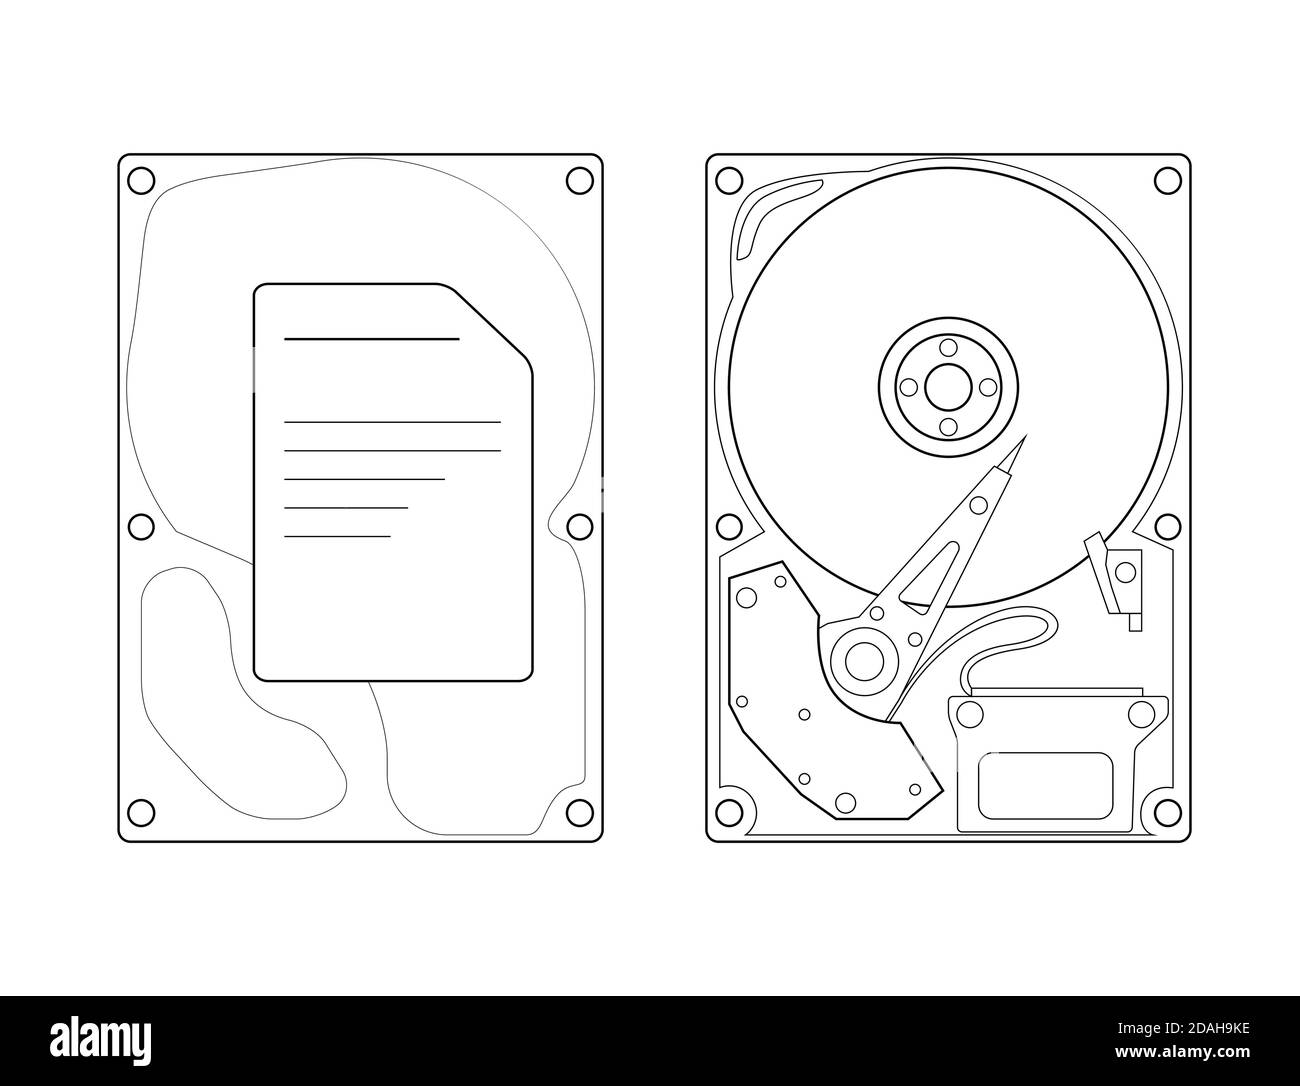 Contour tech illustration of a hard drive with a top view and a cover on a white background. Accessories for the computer. Vector object for drawings, Stock Vector